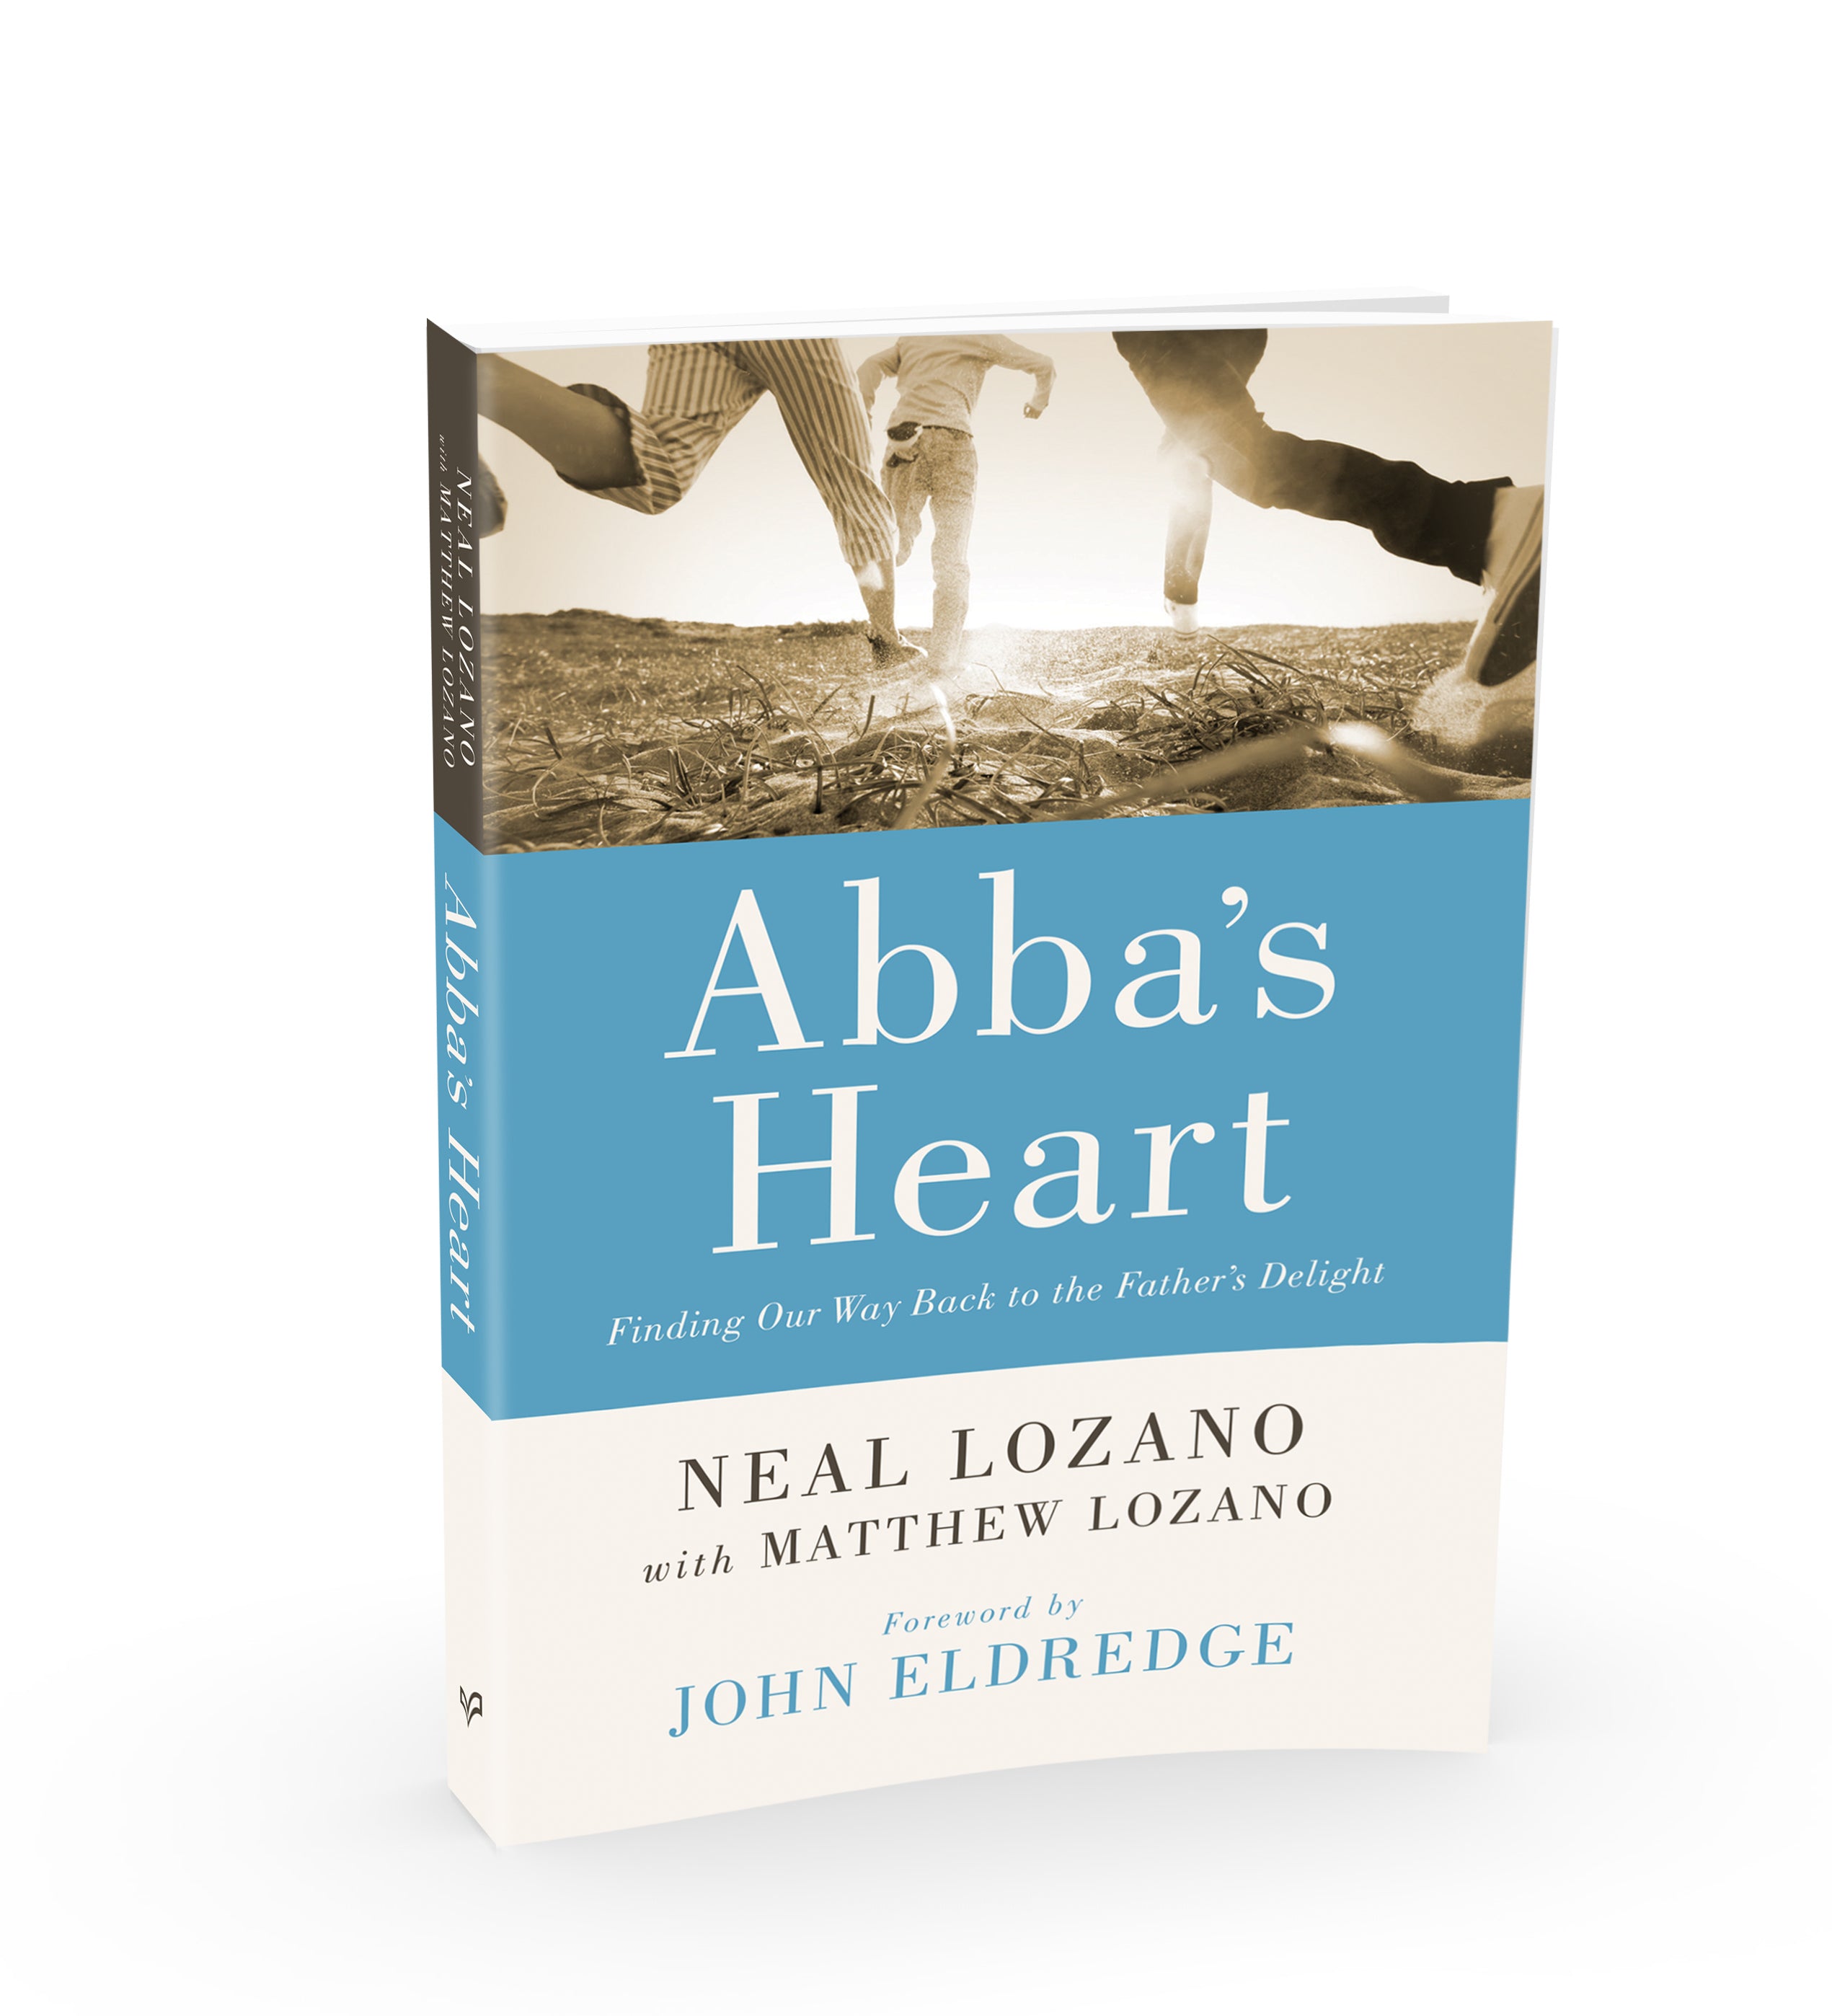 Abba's Heart:  Finding Our Way Back to the Father's Delight